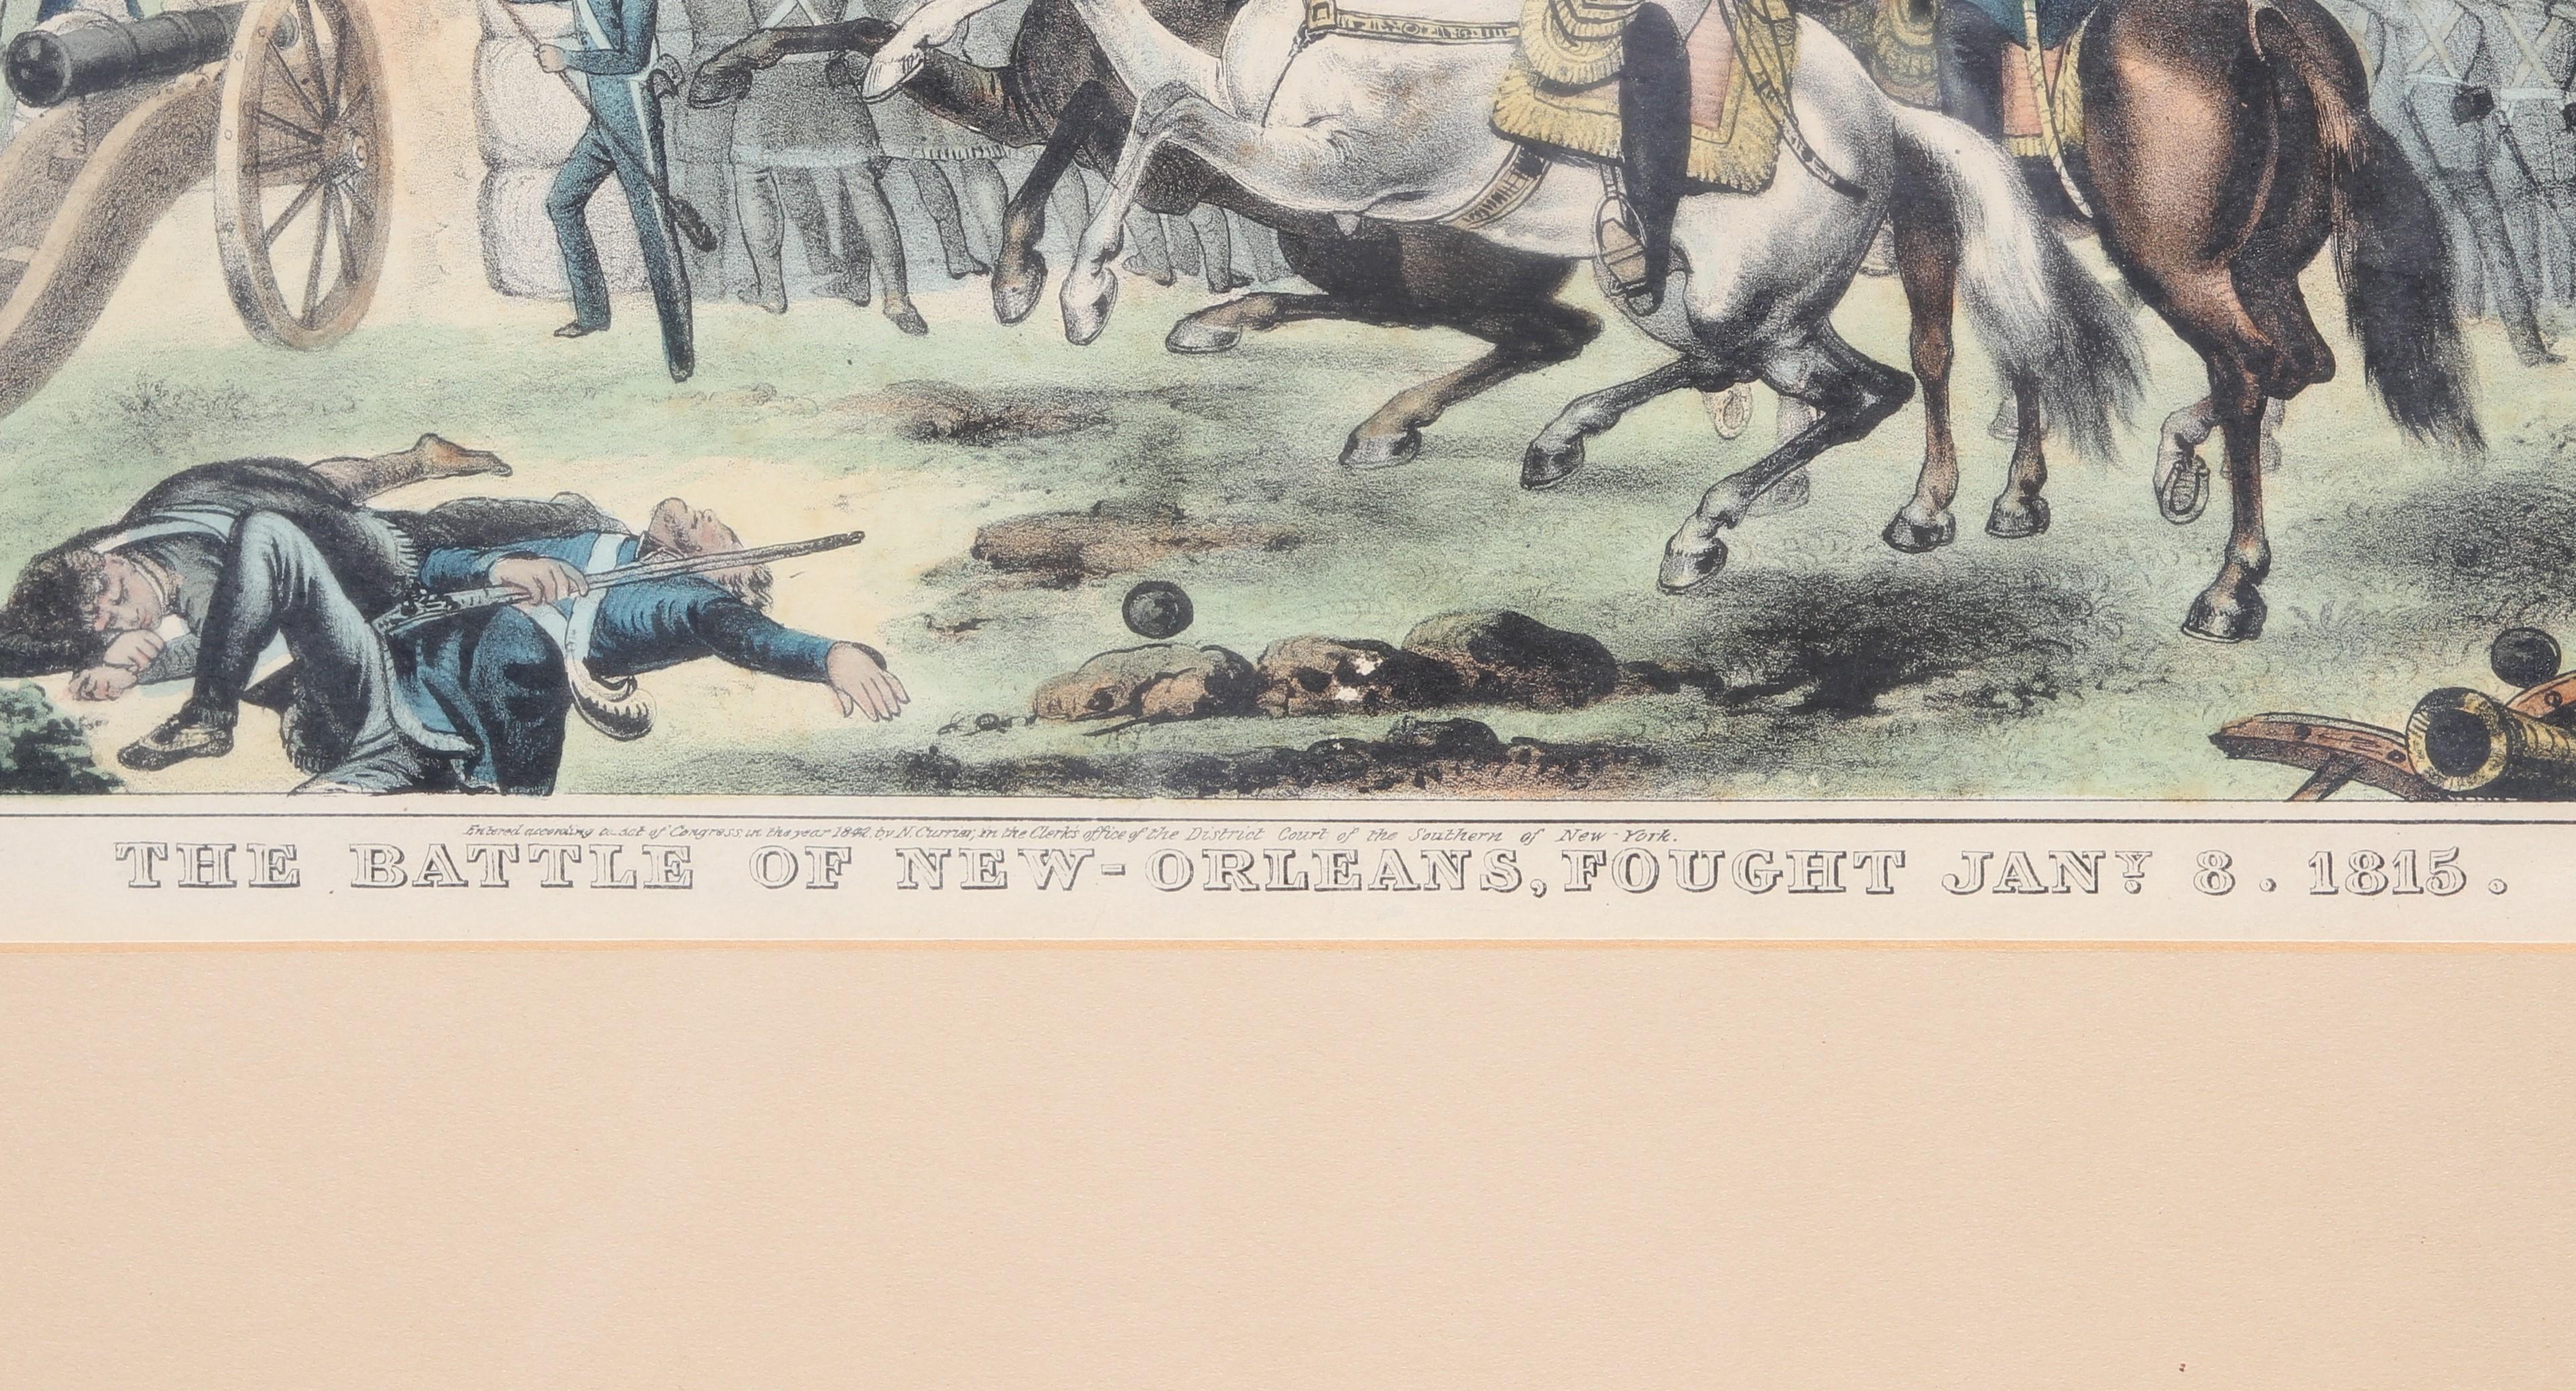 This hand colored lithograph by Nathaniel Currier depicts an officer, likely Andrew Jackson, on a white horse in the center of a chaotic battlefield at the Battle of New Orleans. Among the dead and fighting soldiers in the background and foreground,